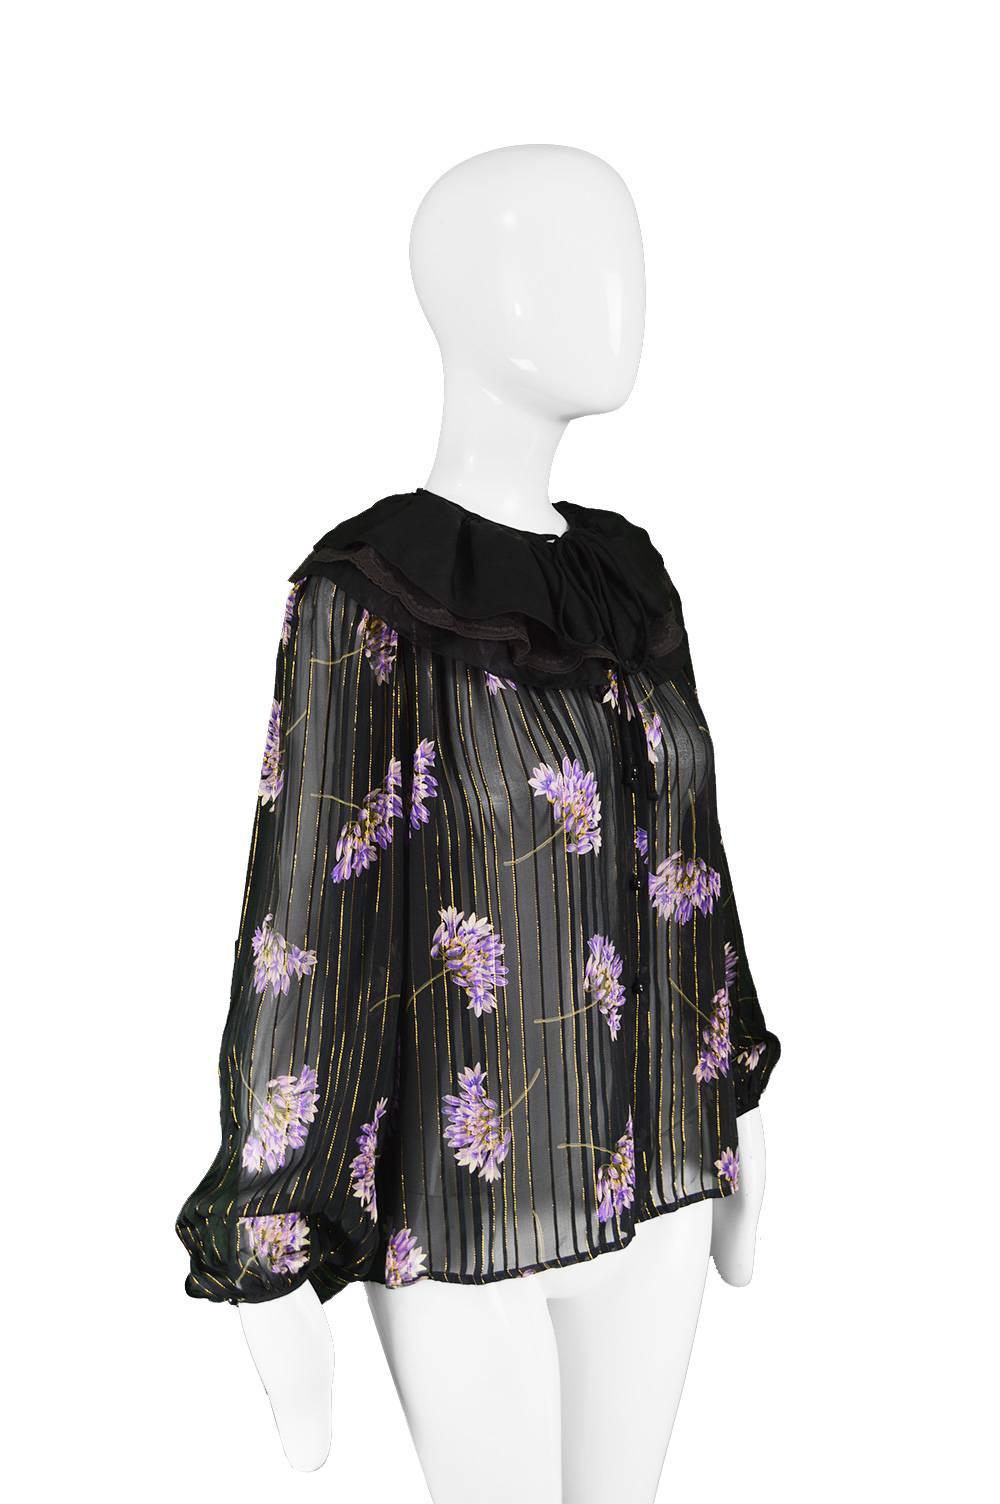 Women's Valentino Silk and Lamé Chiffon Sheer Floral Ruffle Collar Vintage Blouse, 1980s For Sale